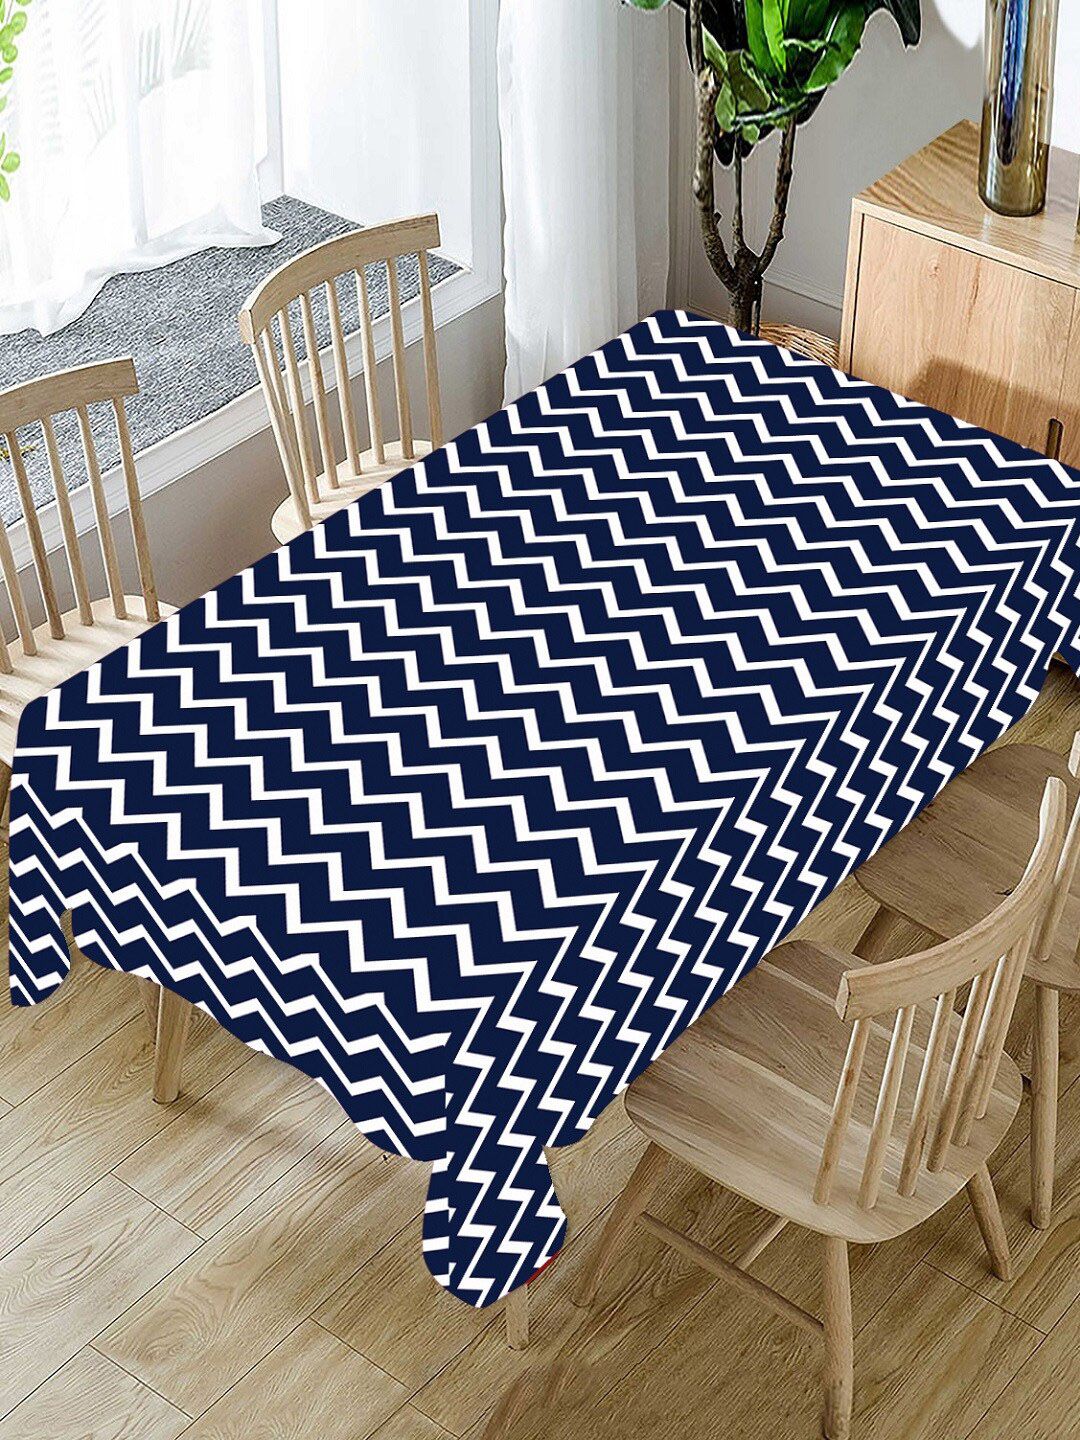 AEROHAVEN Blue 4-Seater Geometric Cotton Table Cover Cloth Price in India